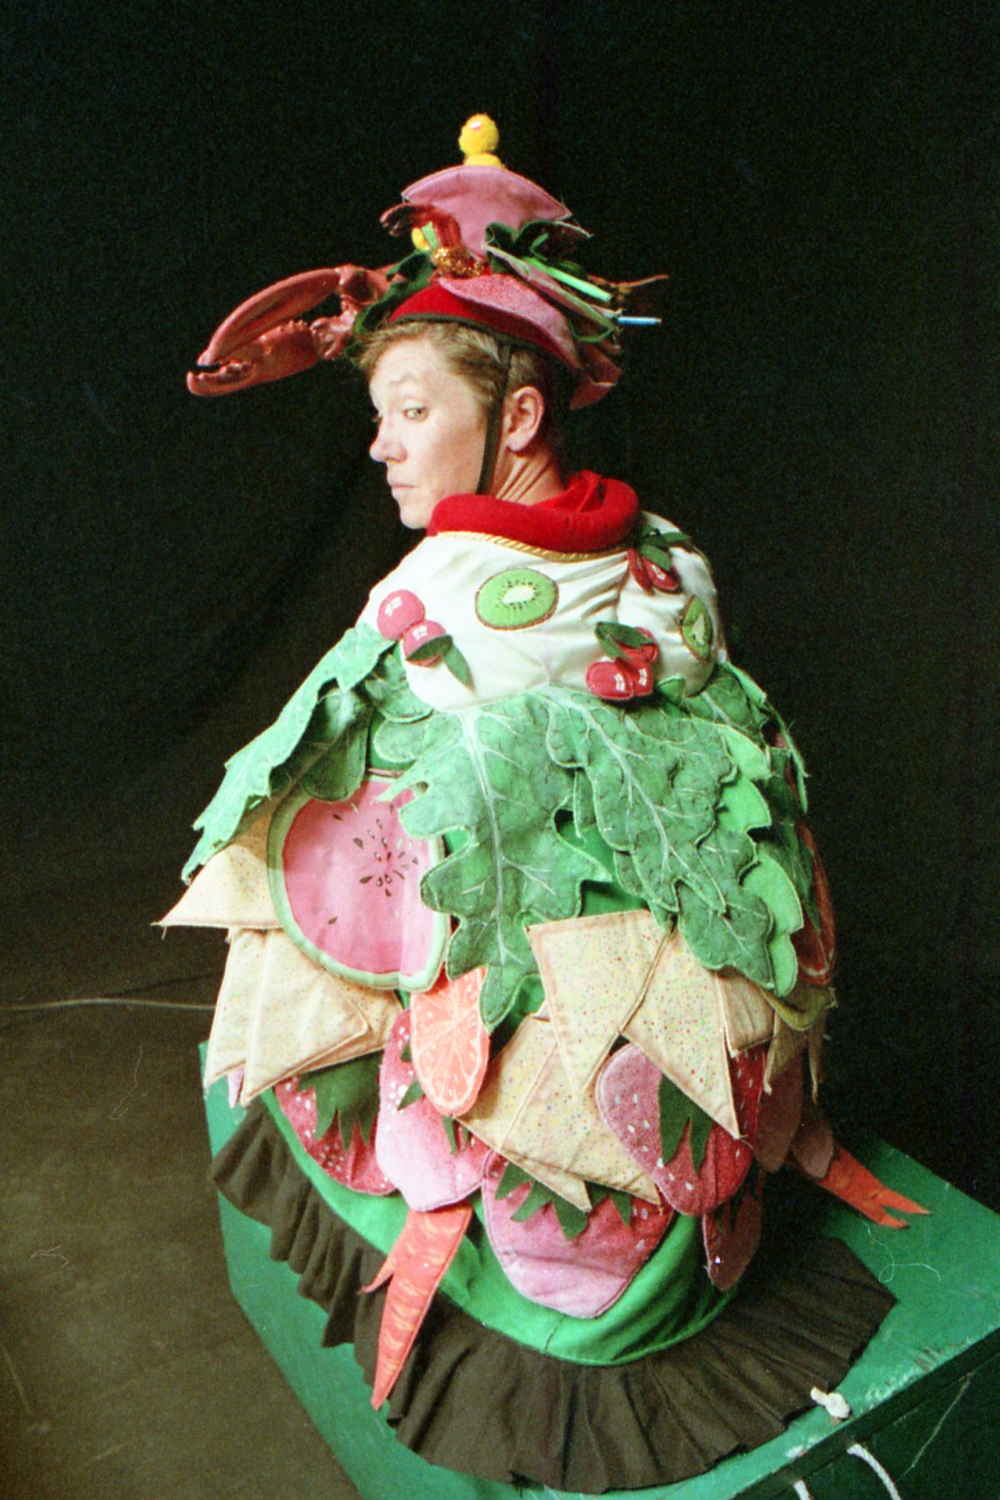 Handspan Theatre Guts costumed actors squatting in embroidered cloak of green leaves and pink vegetables with a lobster helmet